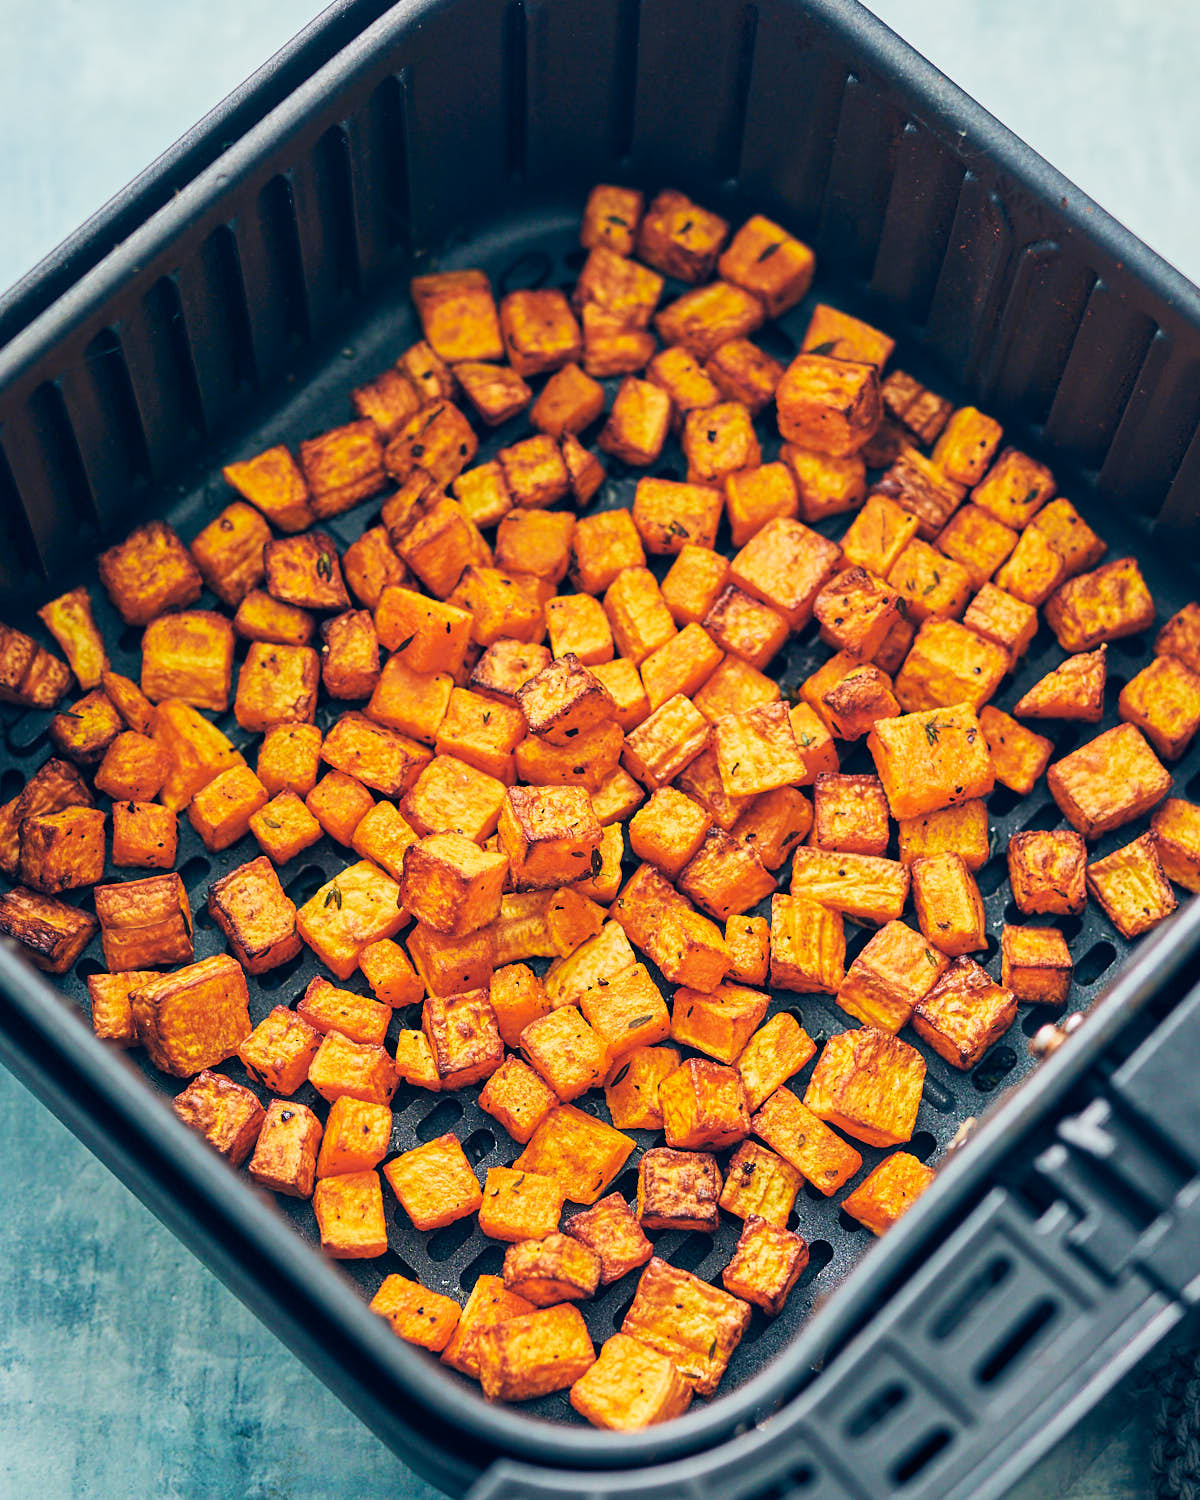 Roasted butternut squash in an air fryer basket after cooking.